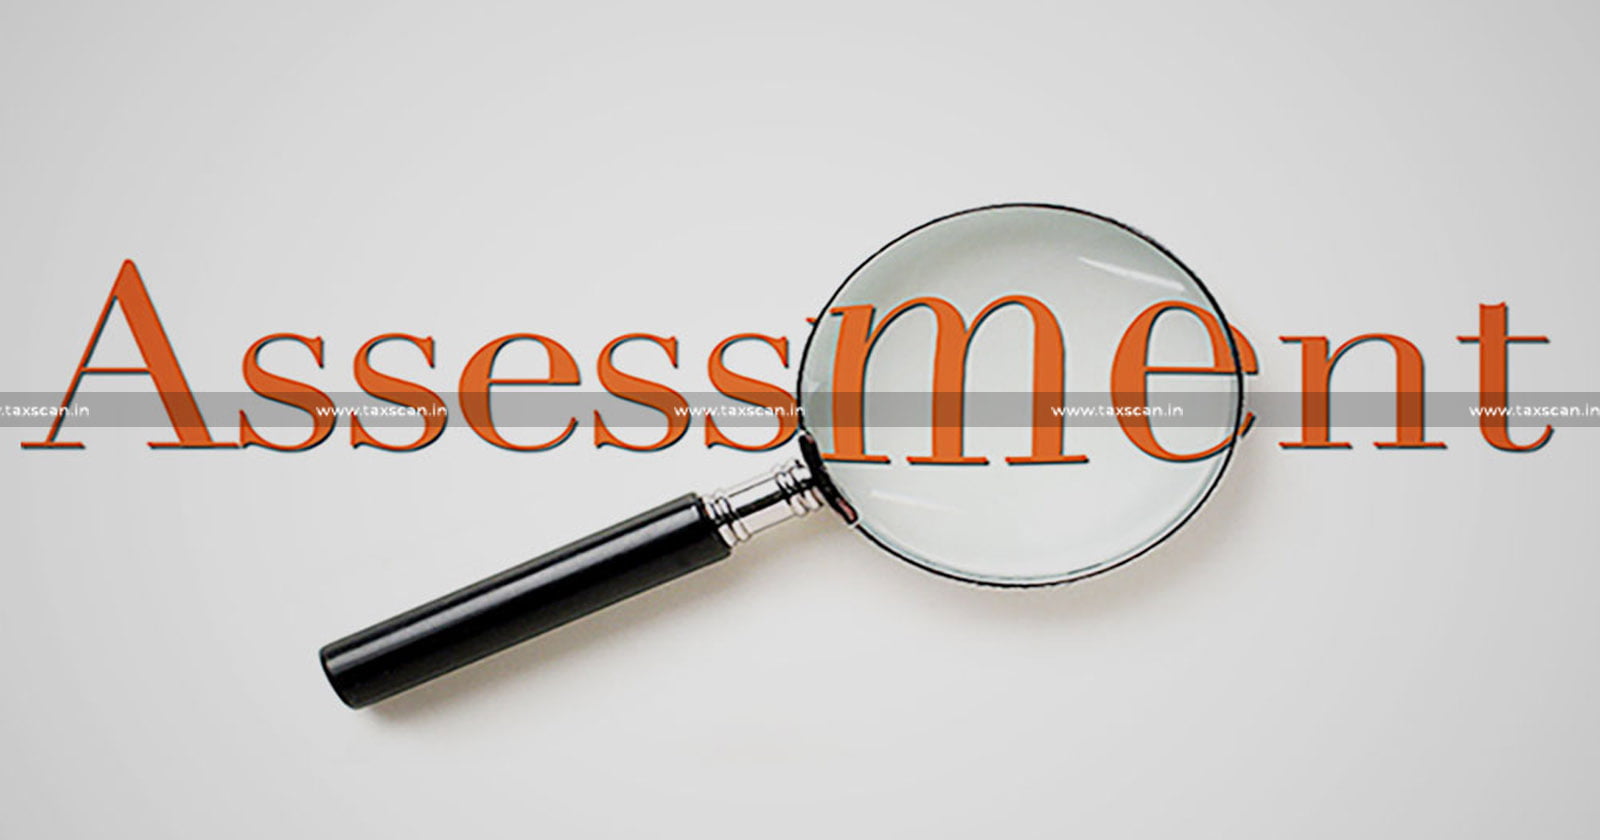 Delhi HC - Reassessment Order passed without Considering Reply of Assessee - Reassessment Order - Reassessment - taxscan